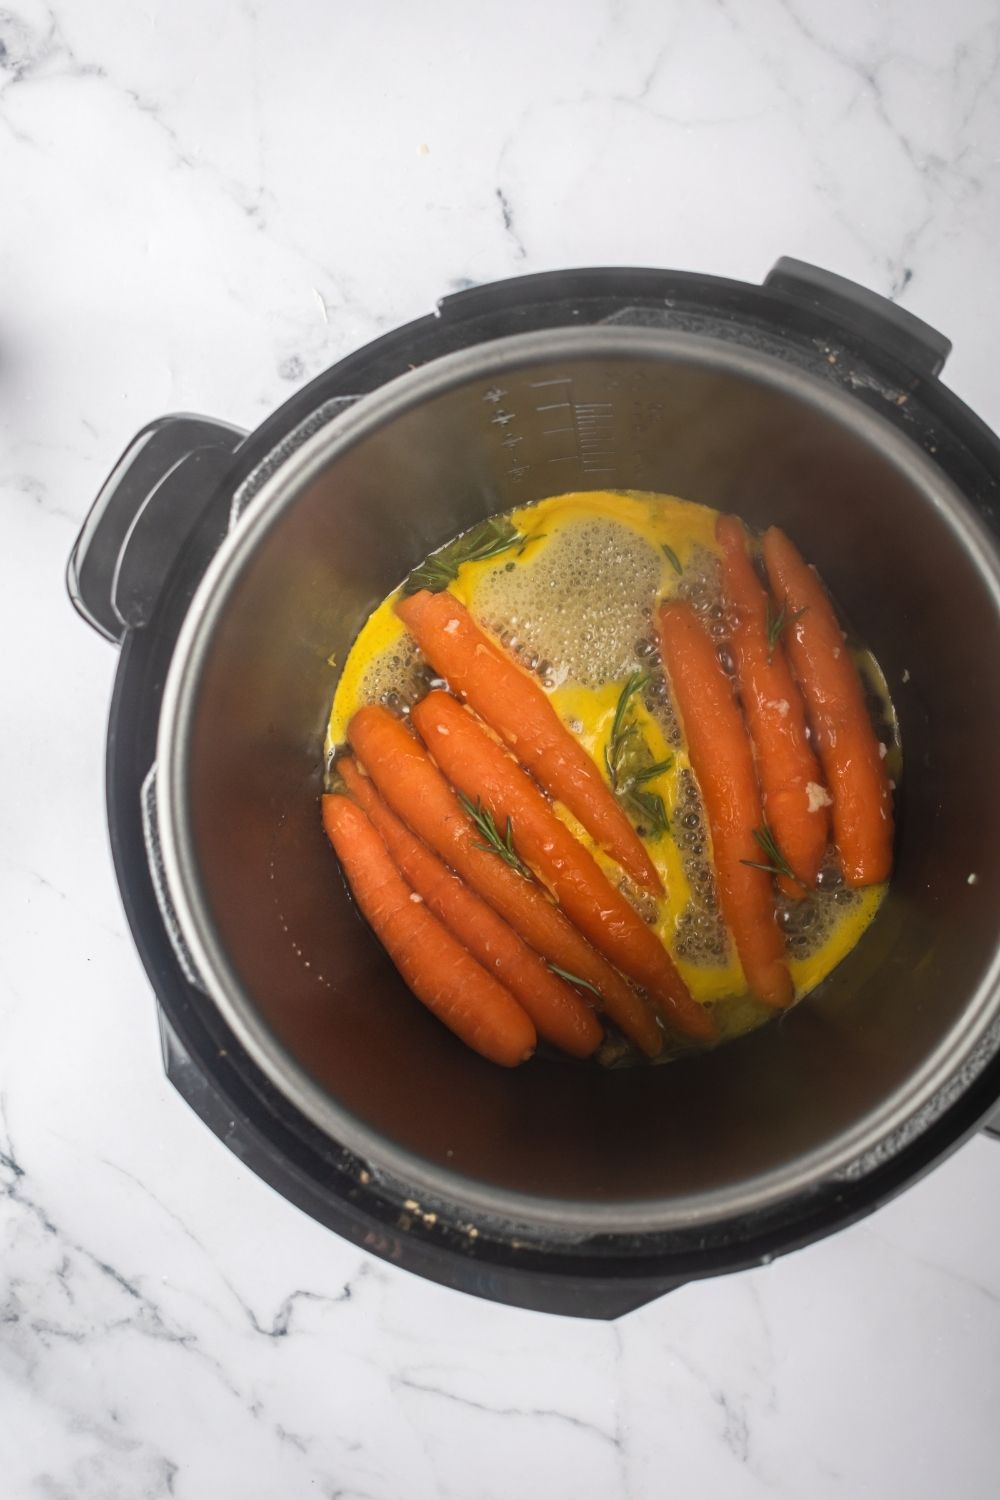 An instant pot with honey glazed carrots cooking in it.